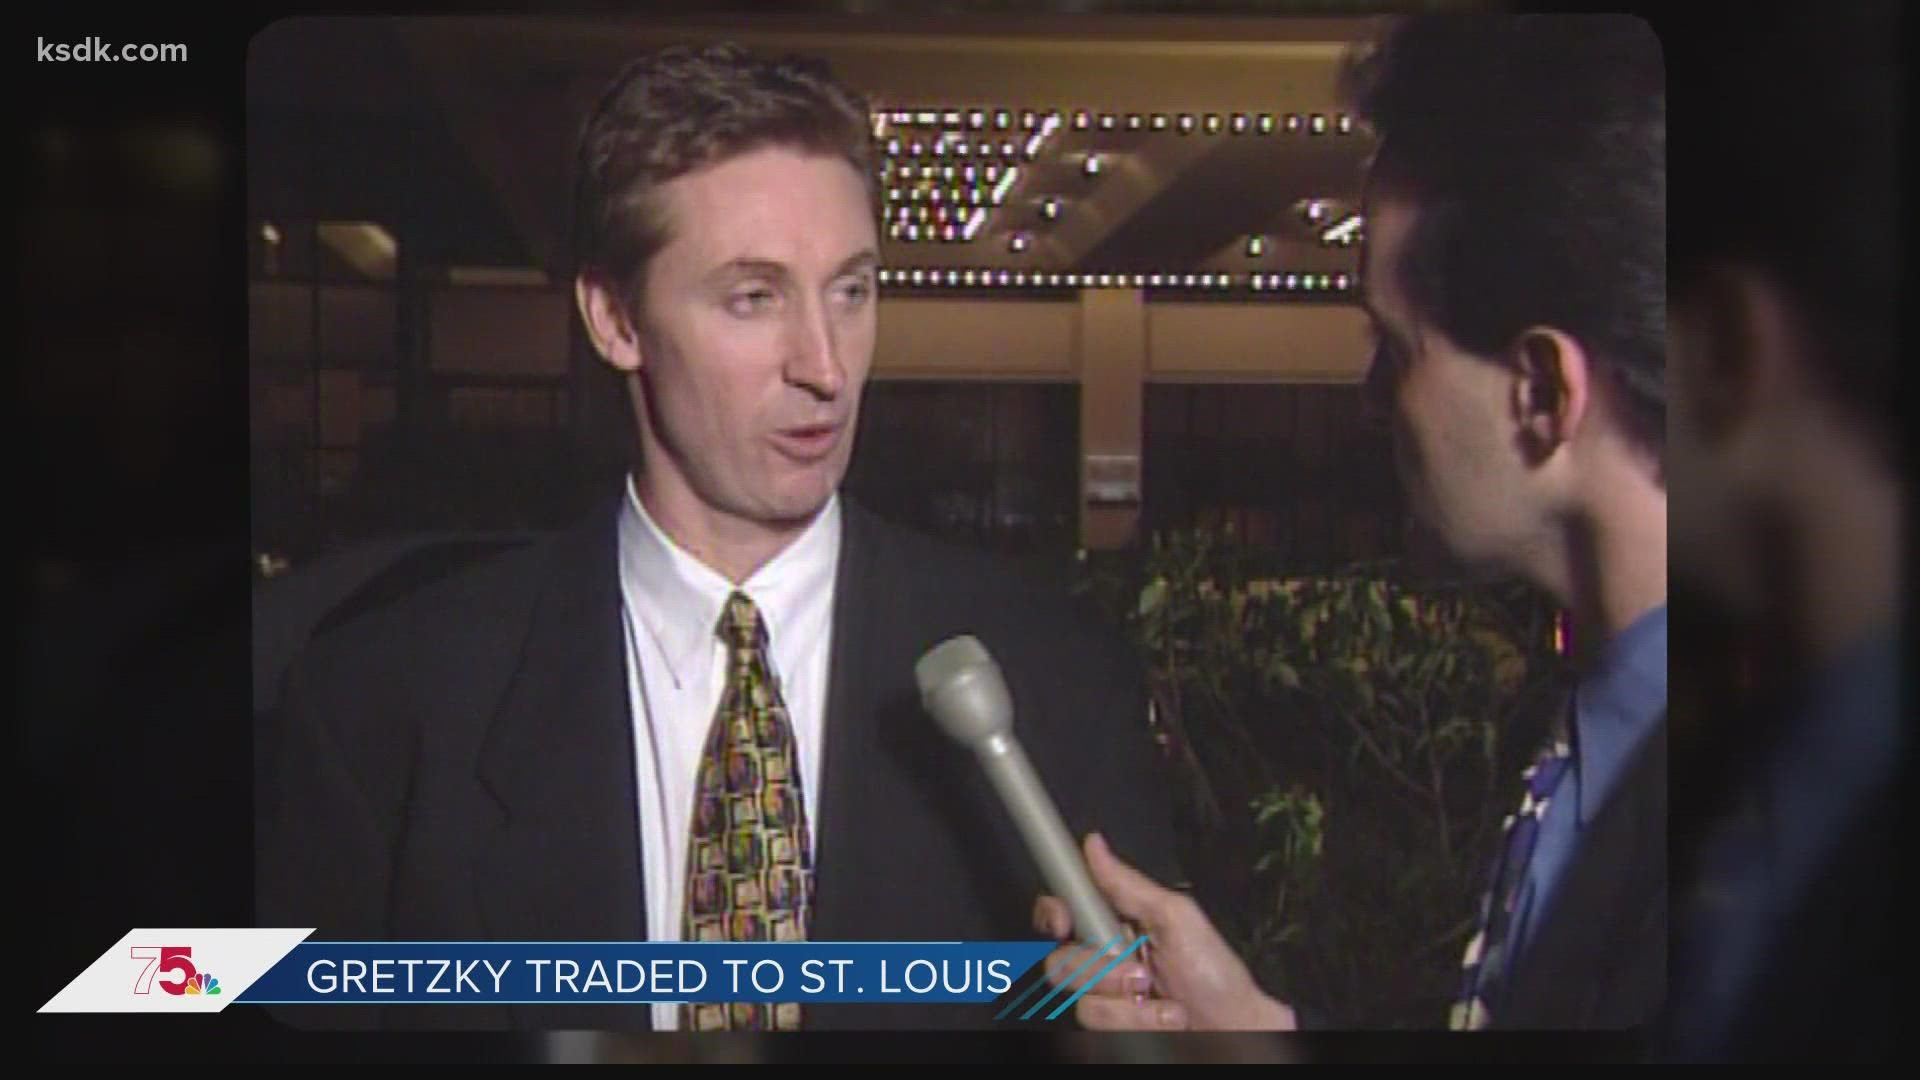 In 1996, the Blues set the hockey world on fire with a trade for "The Great One." It didn't end in a Stanley Cup, but Gretzky-mania left a mark on St. Louis.